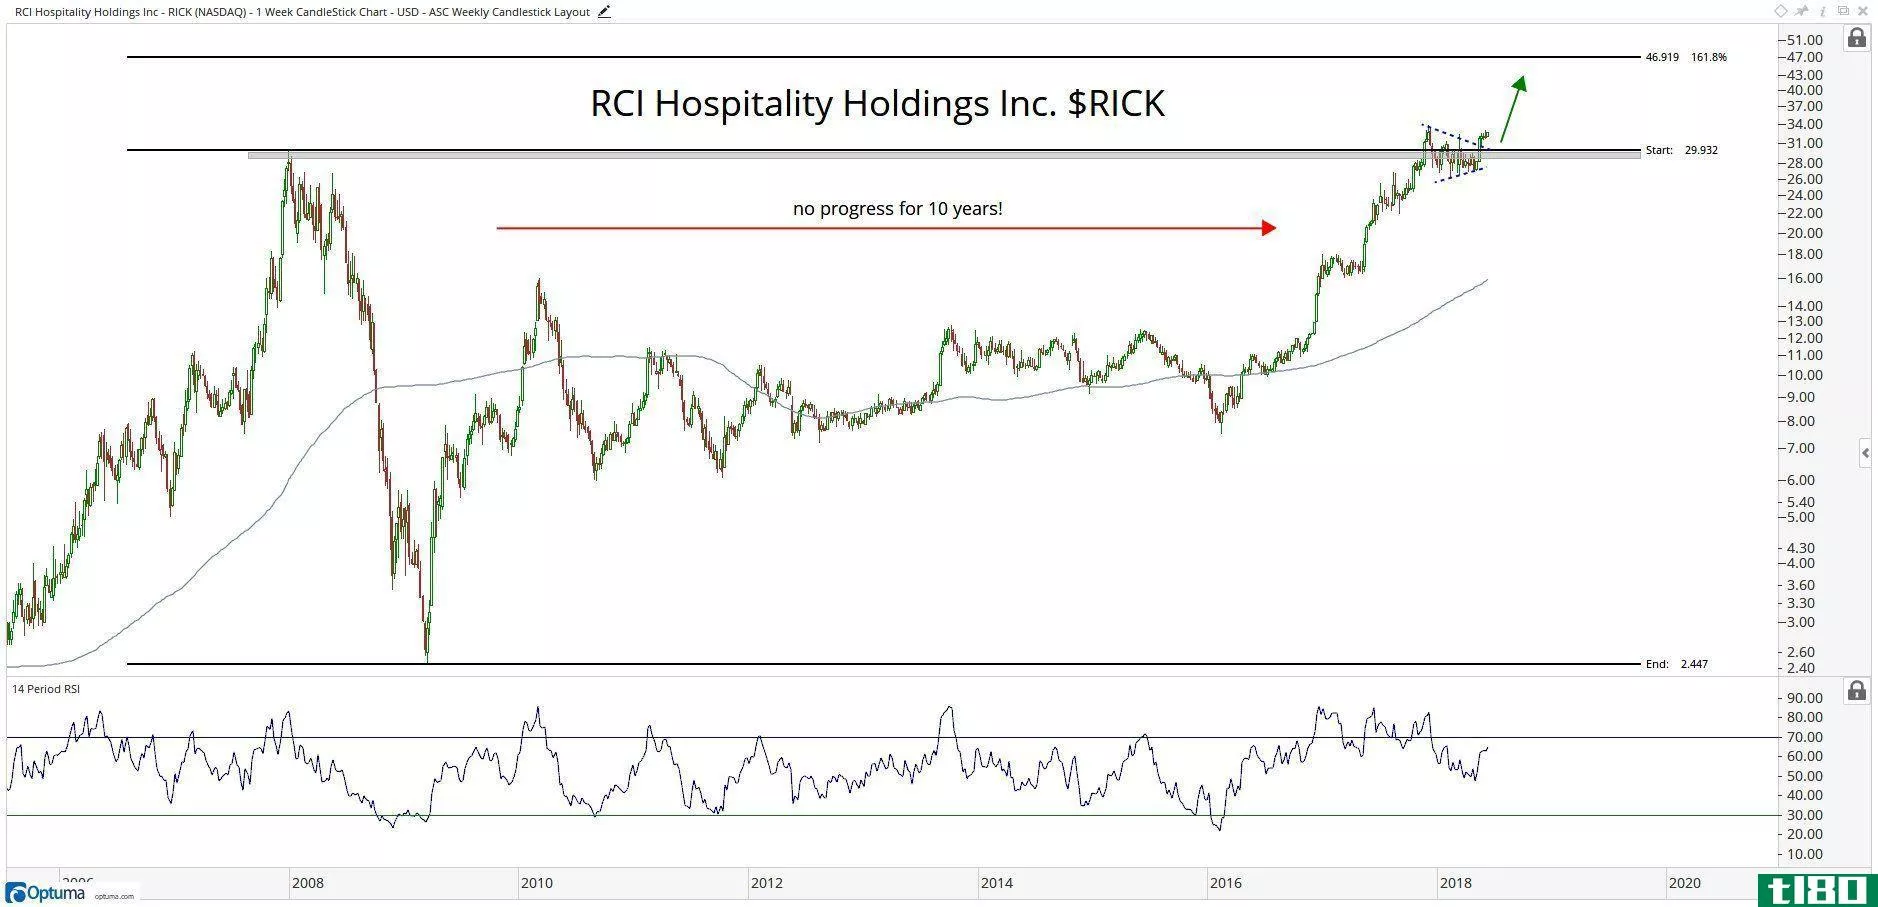 Technical chart showing the performance of RCI Hospitality Holdings, Inc. (RICK)